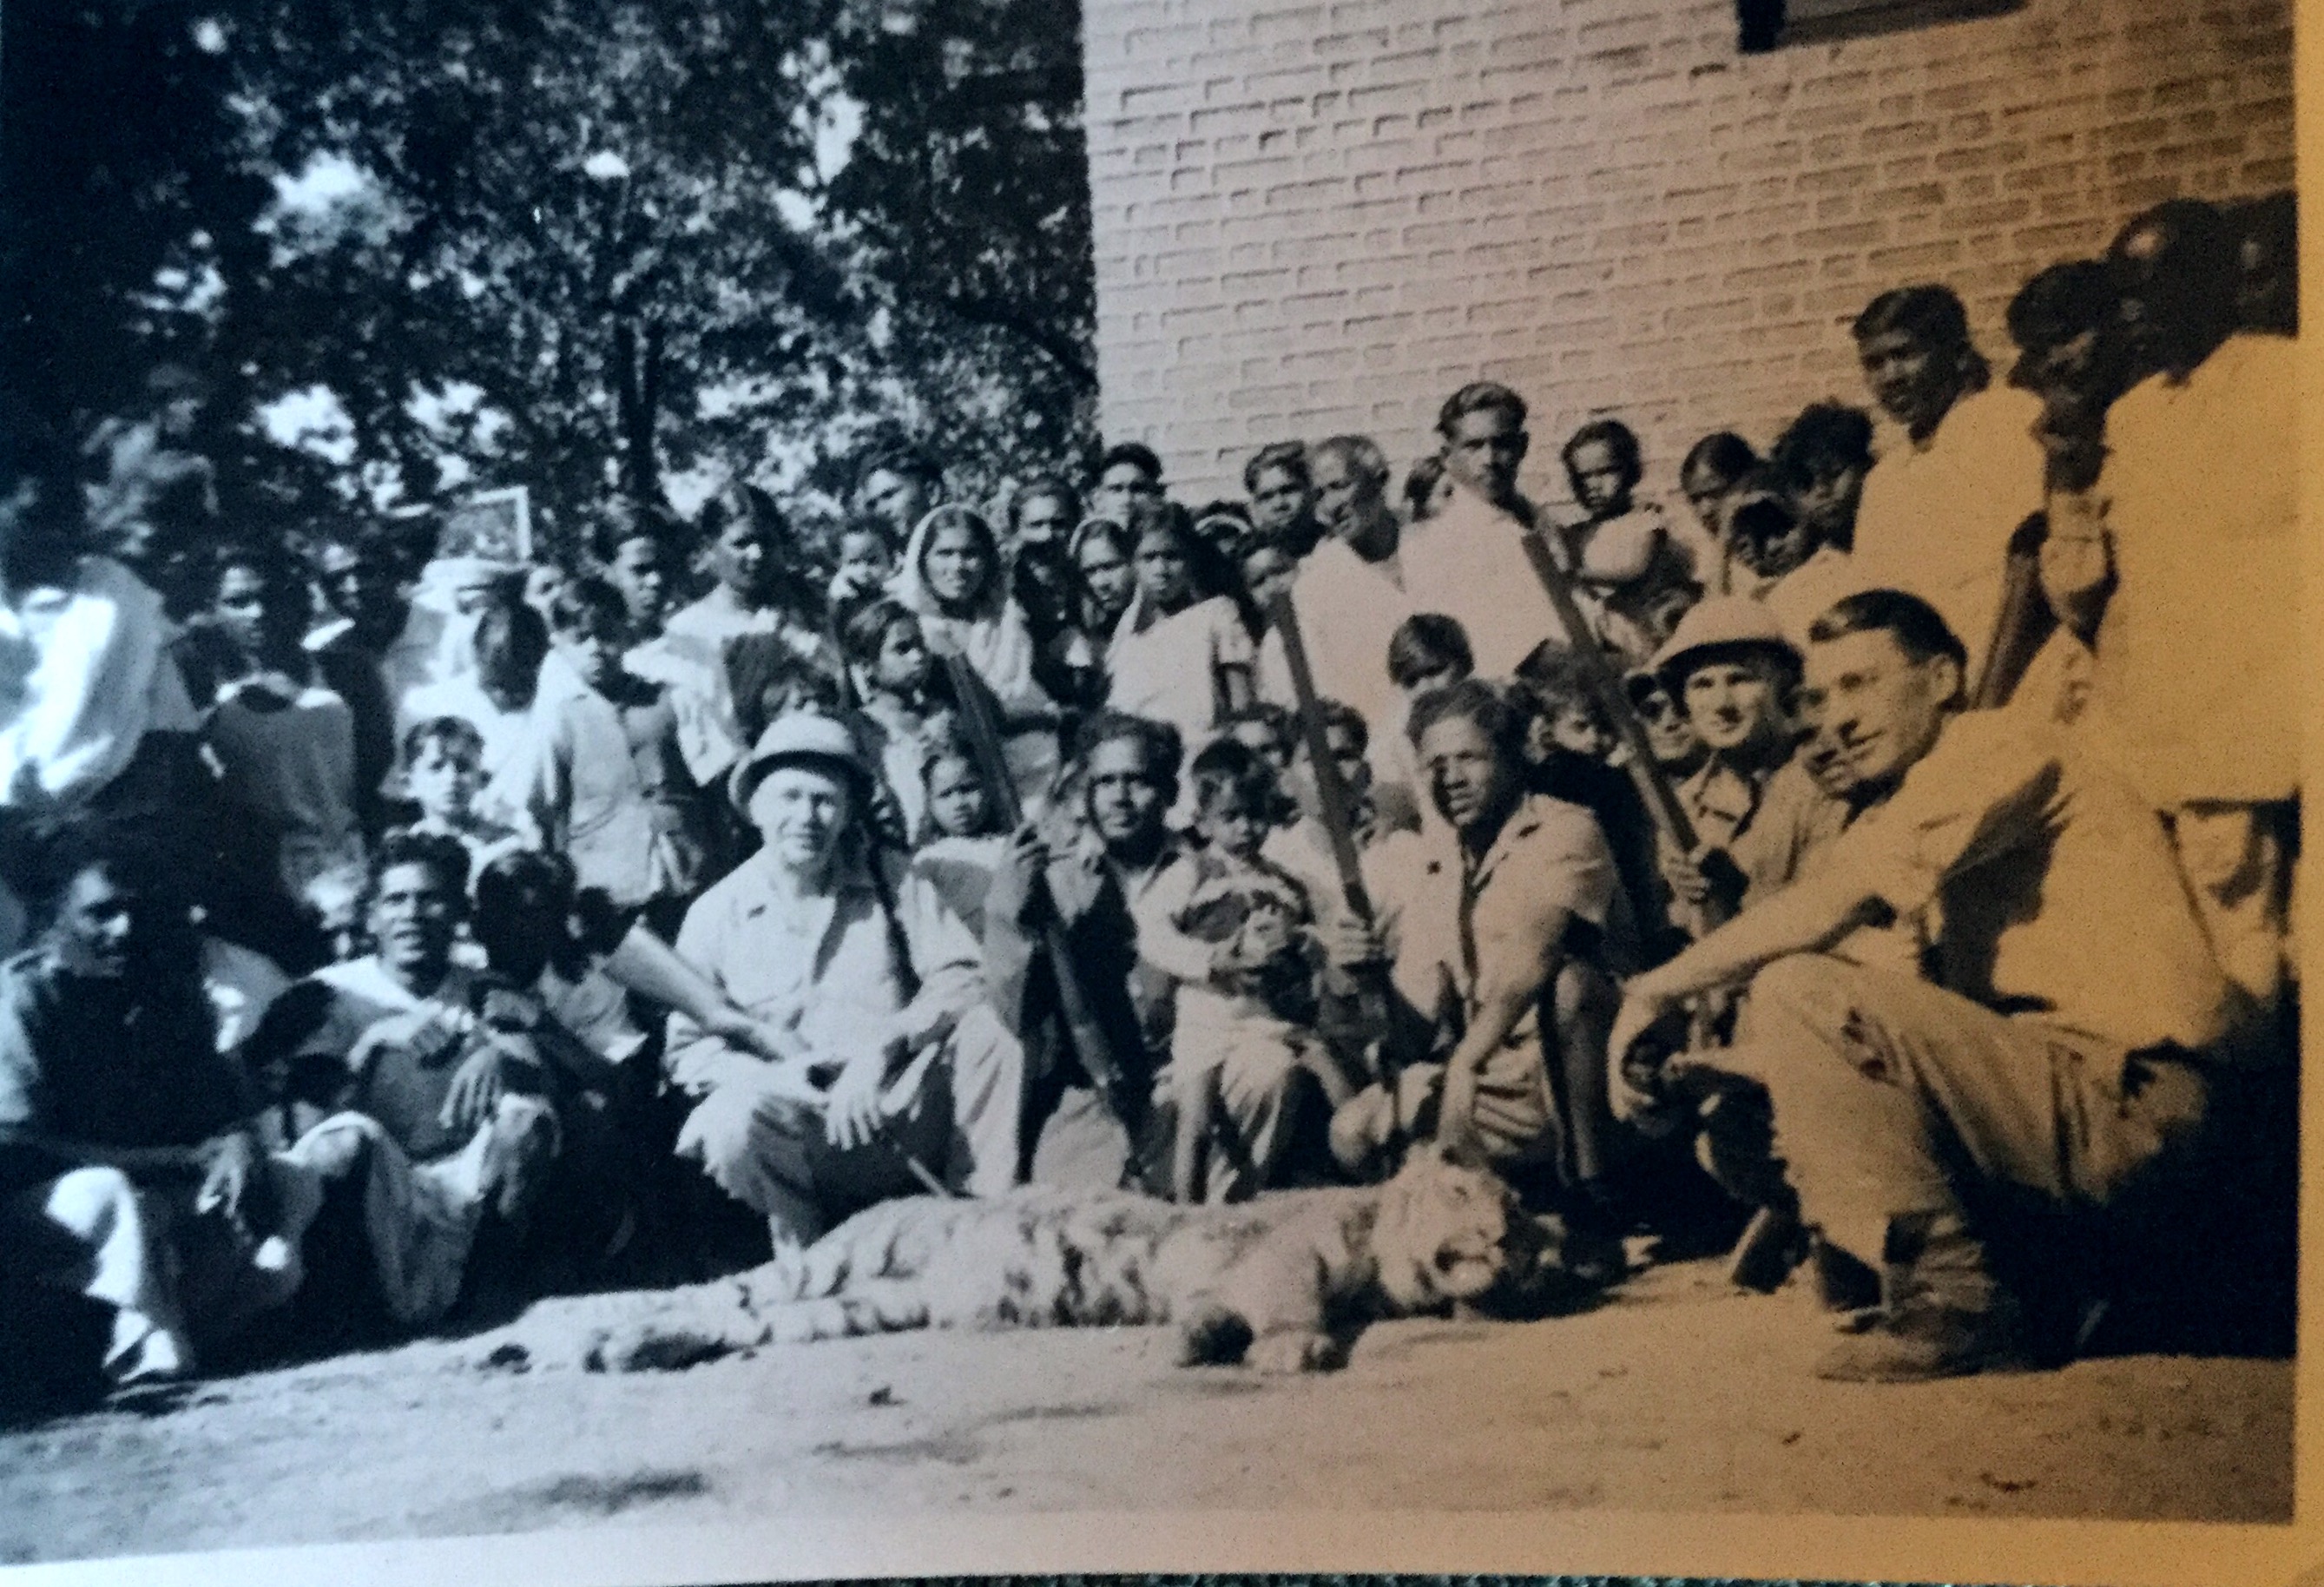 Tiger hunt in 1950 in India when M9m and Dad attended the 50th anniversary of the leper work in Champa.